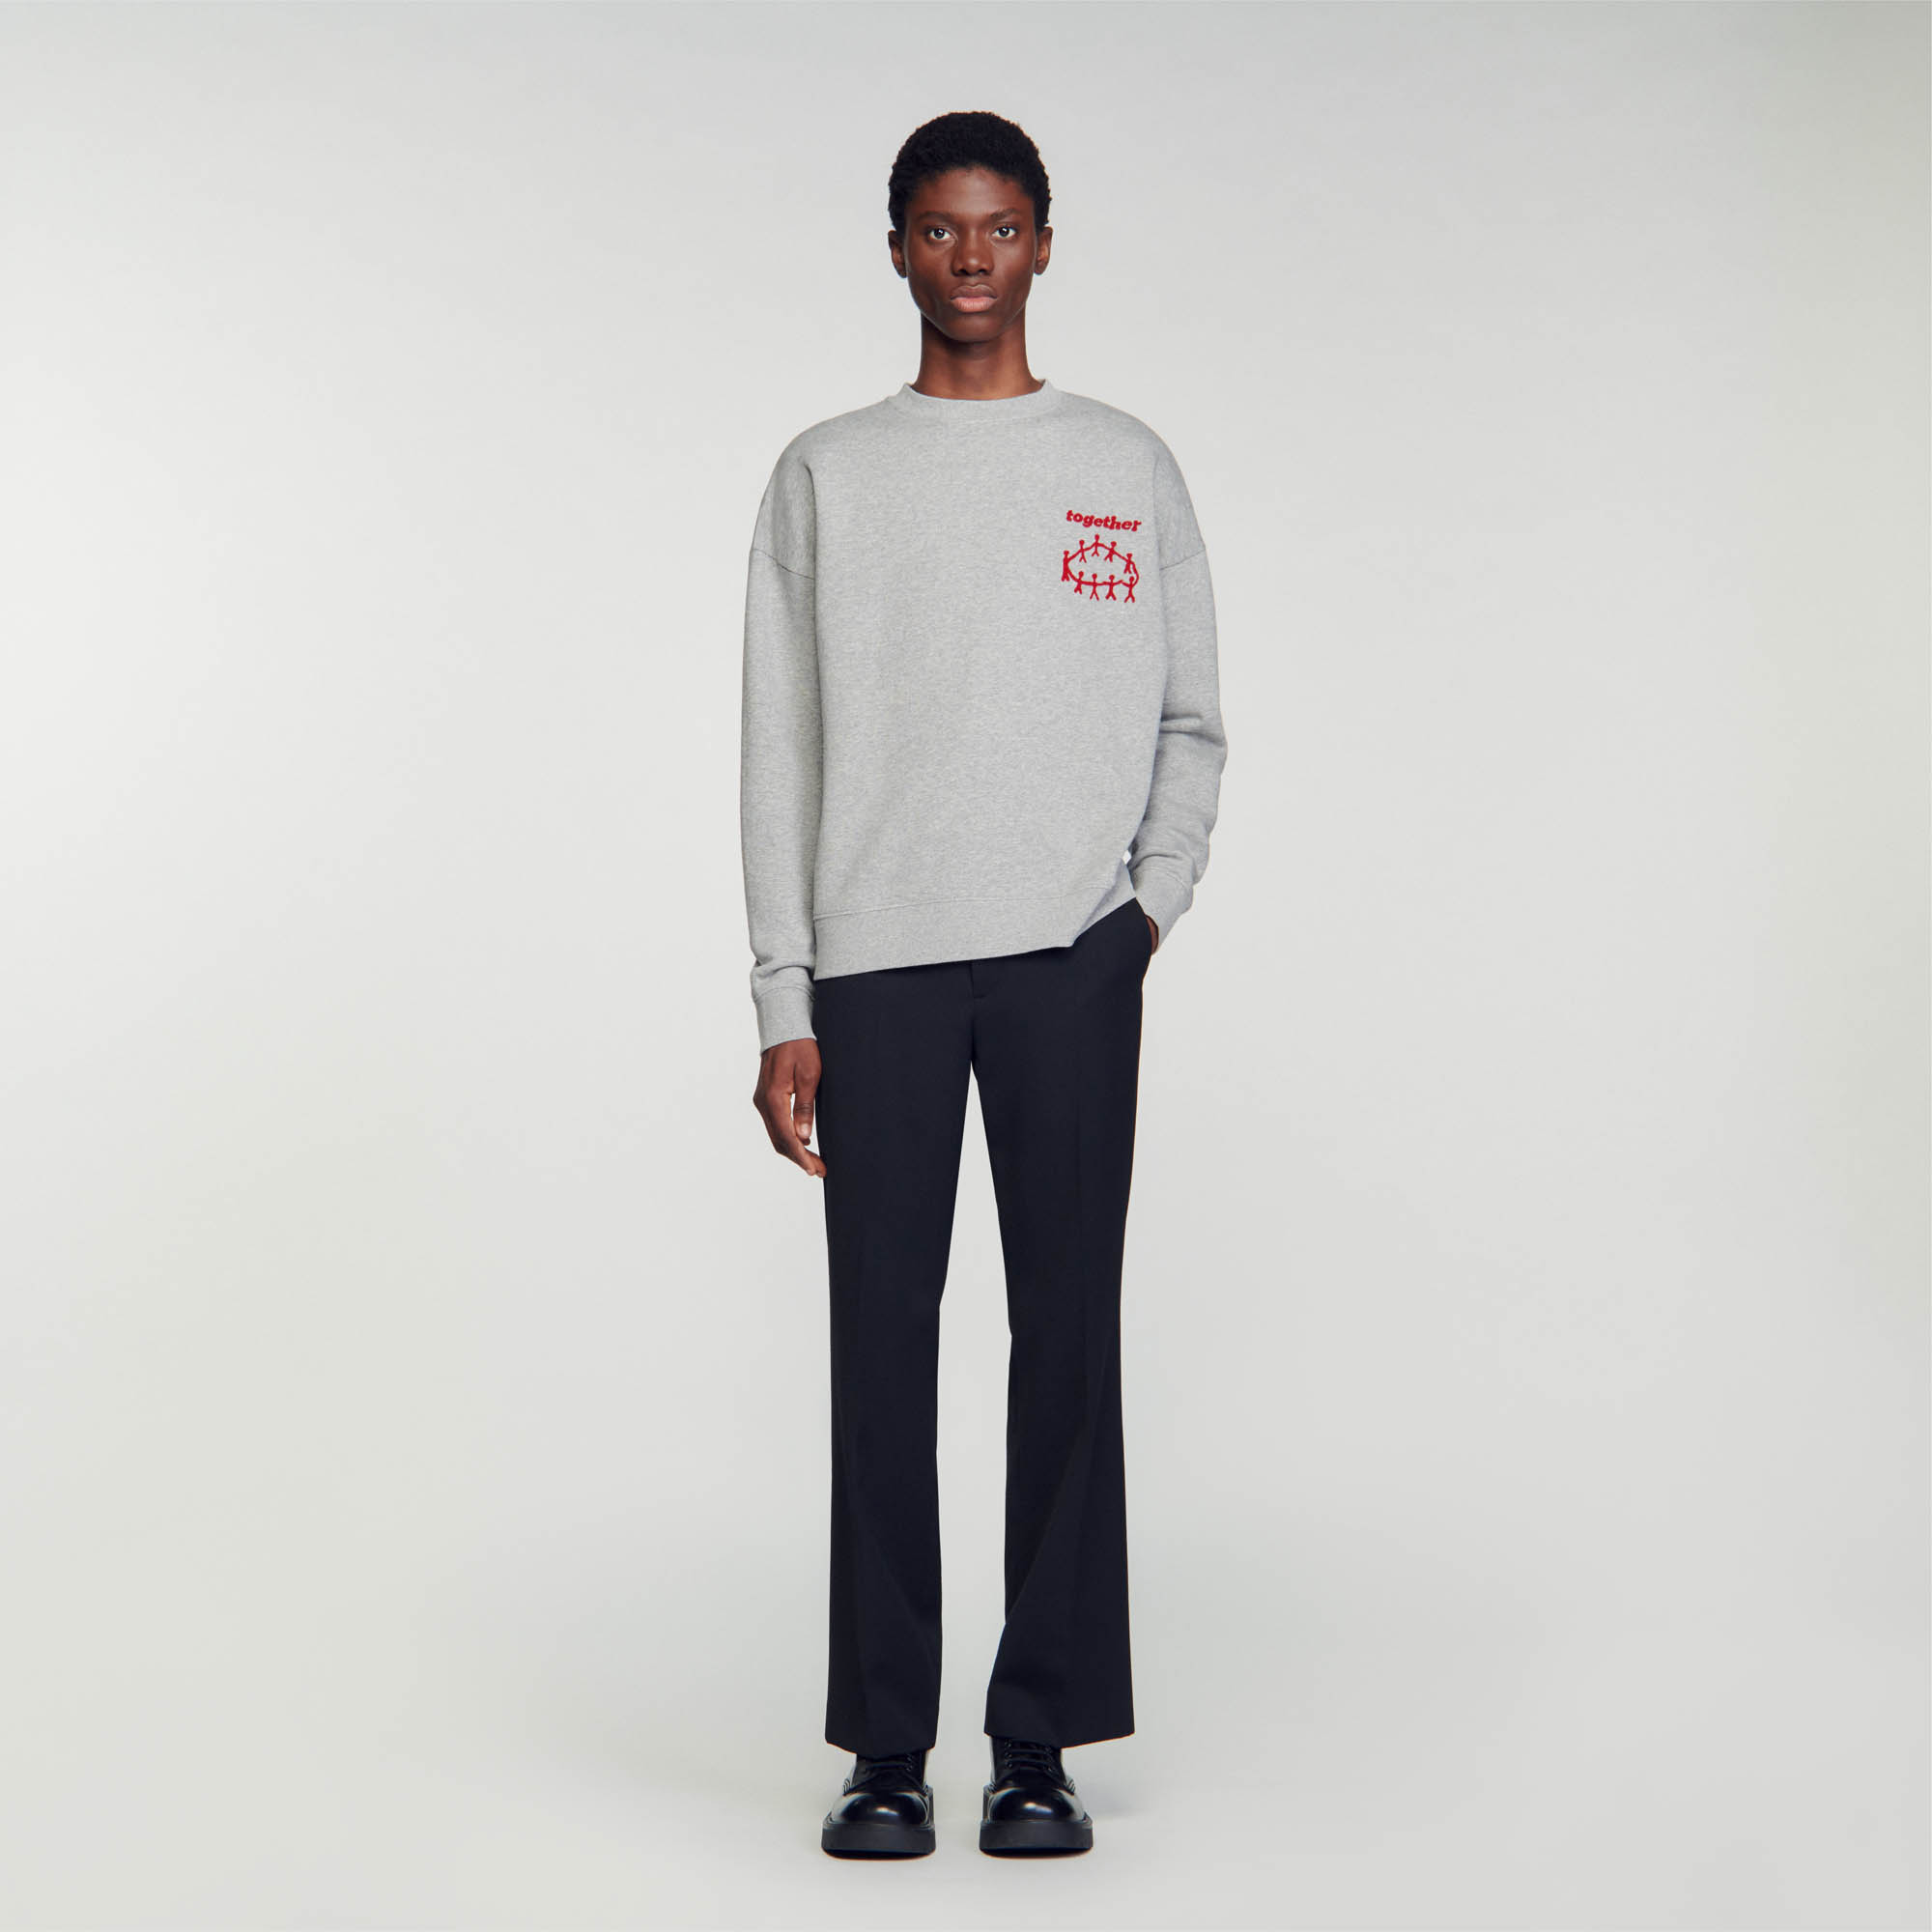 Sandro cotton Rib: Brushed cotton fleece sweatshirt with round neck and long sleeves, embellished with a Together flocking on the chest